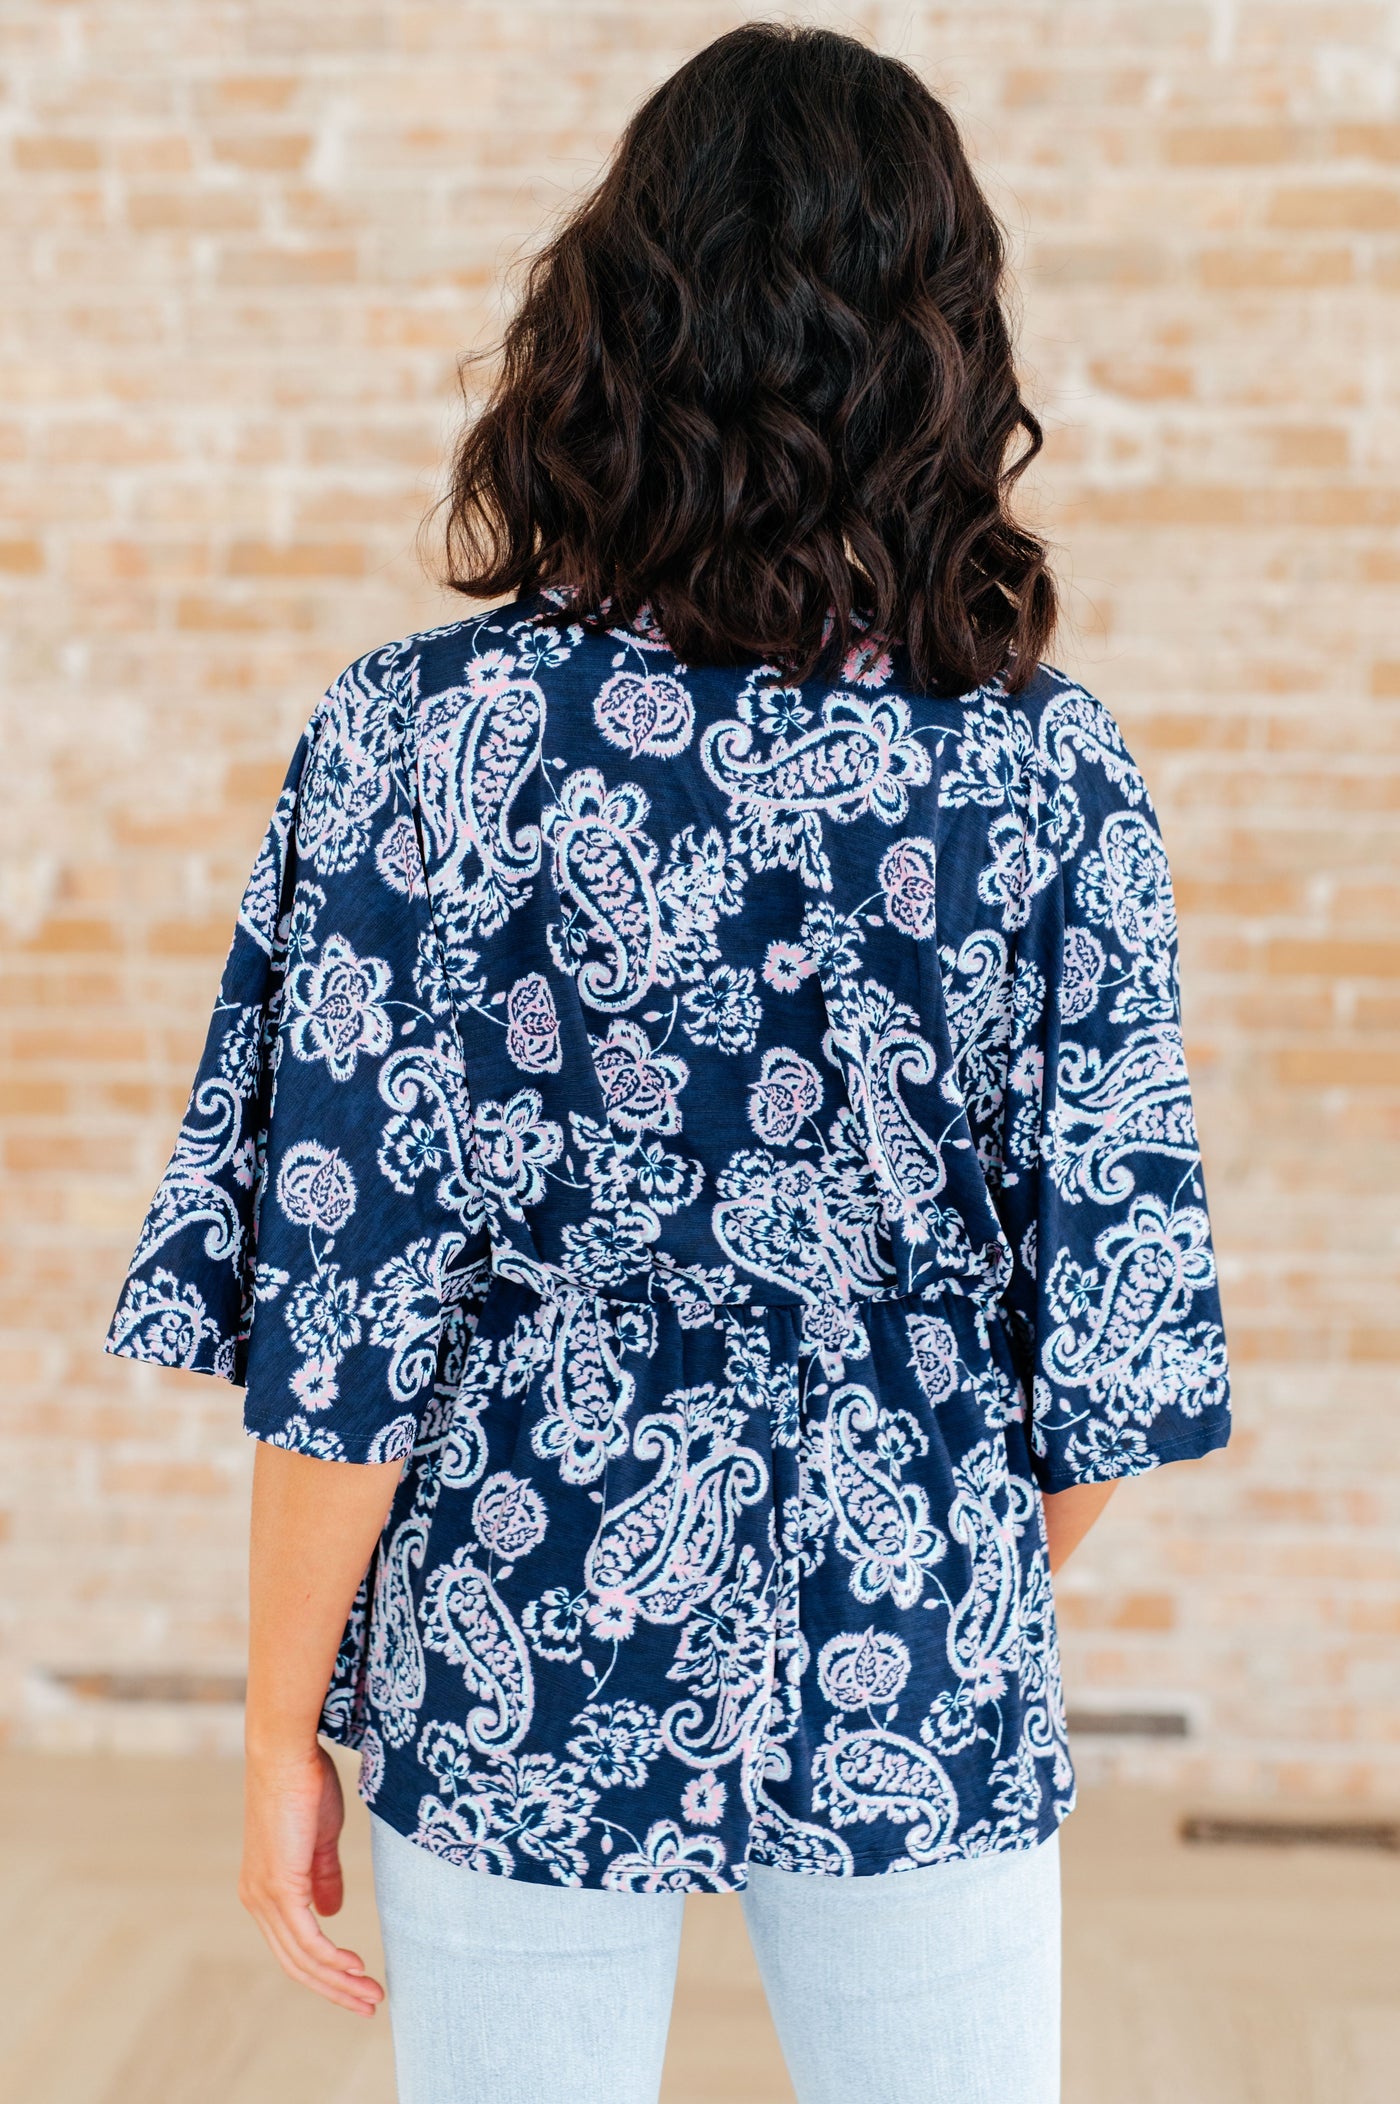 Dreamer Peplum Top in Navy and Pink Paisley Southern Soul Collectives